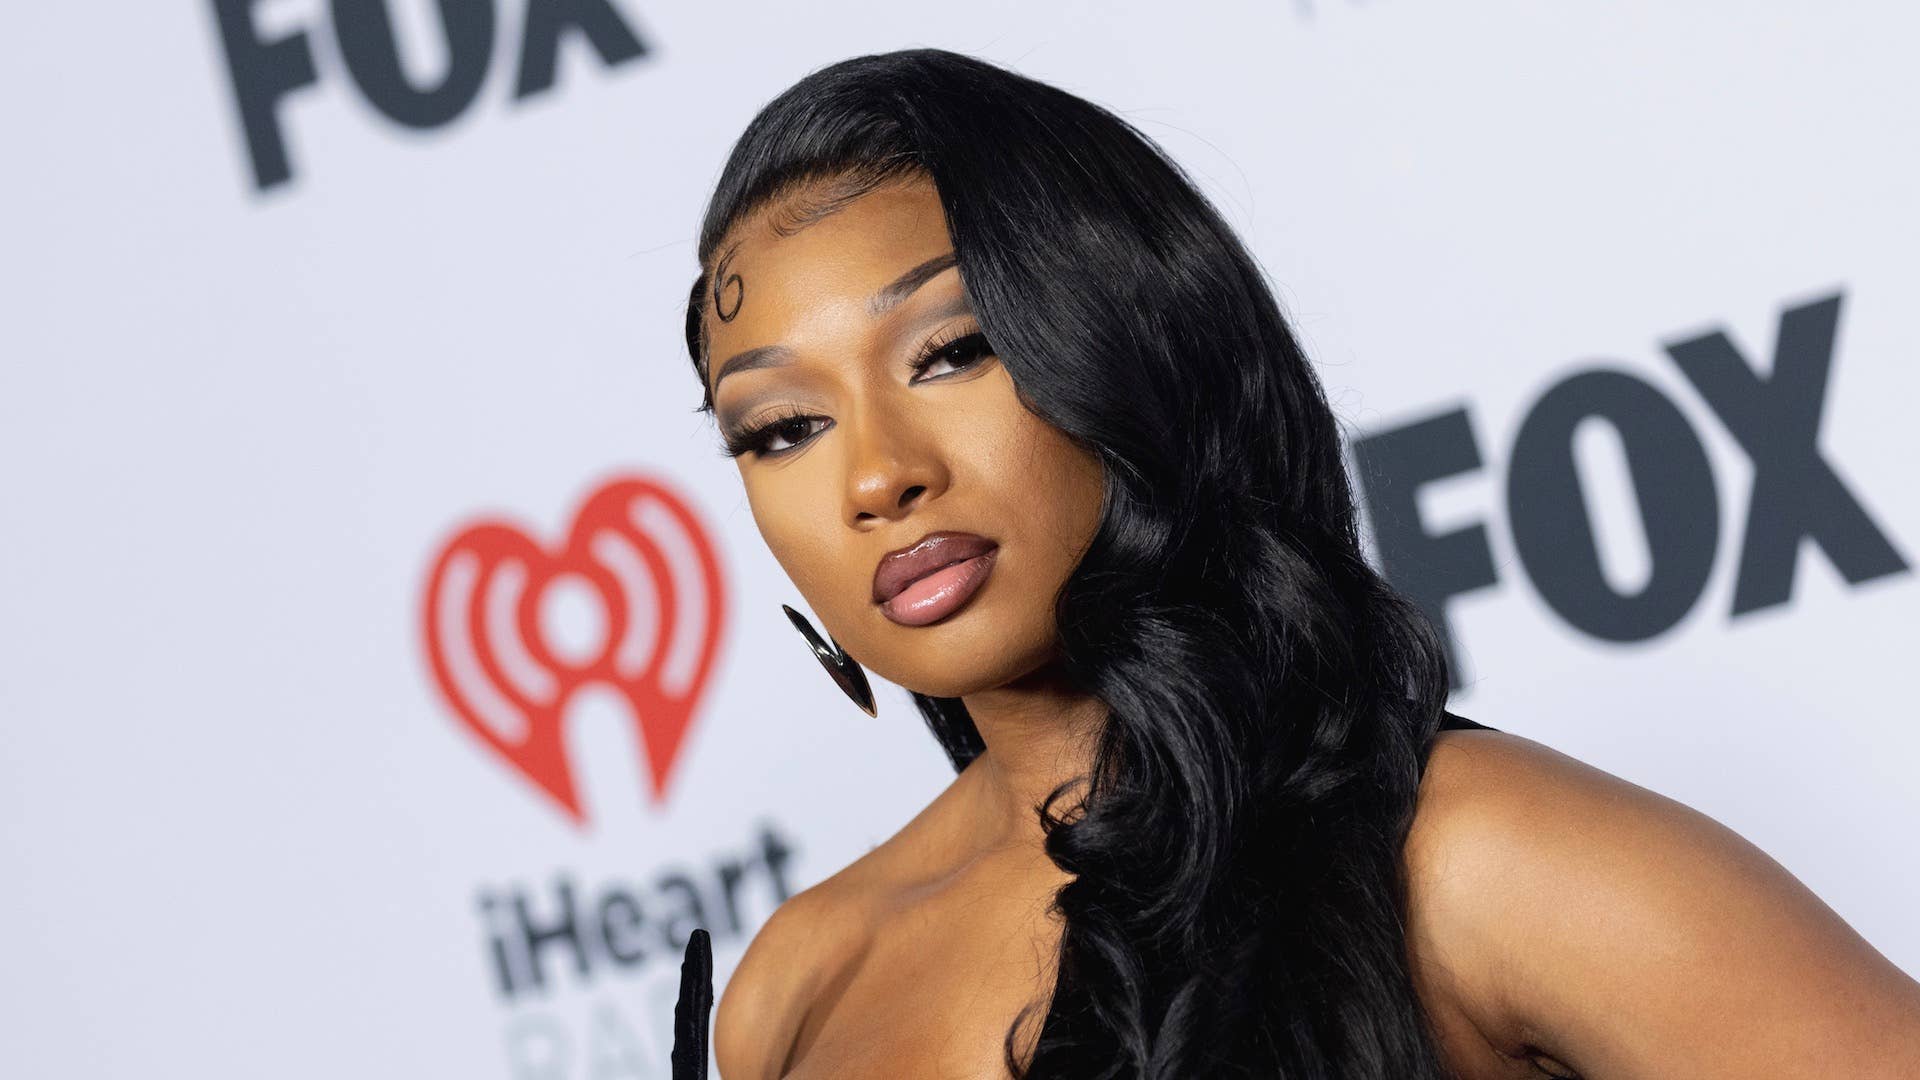 egan Thee Stallion arrives at the 2022 iHeartRadio music awards